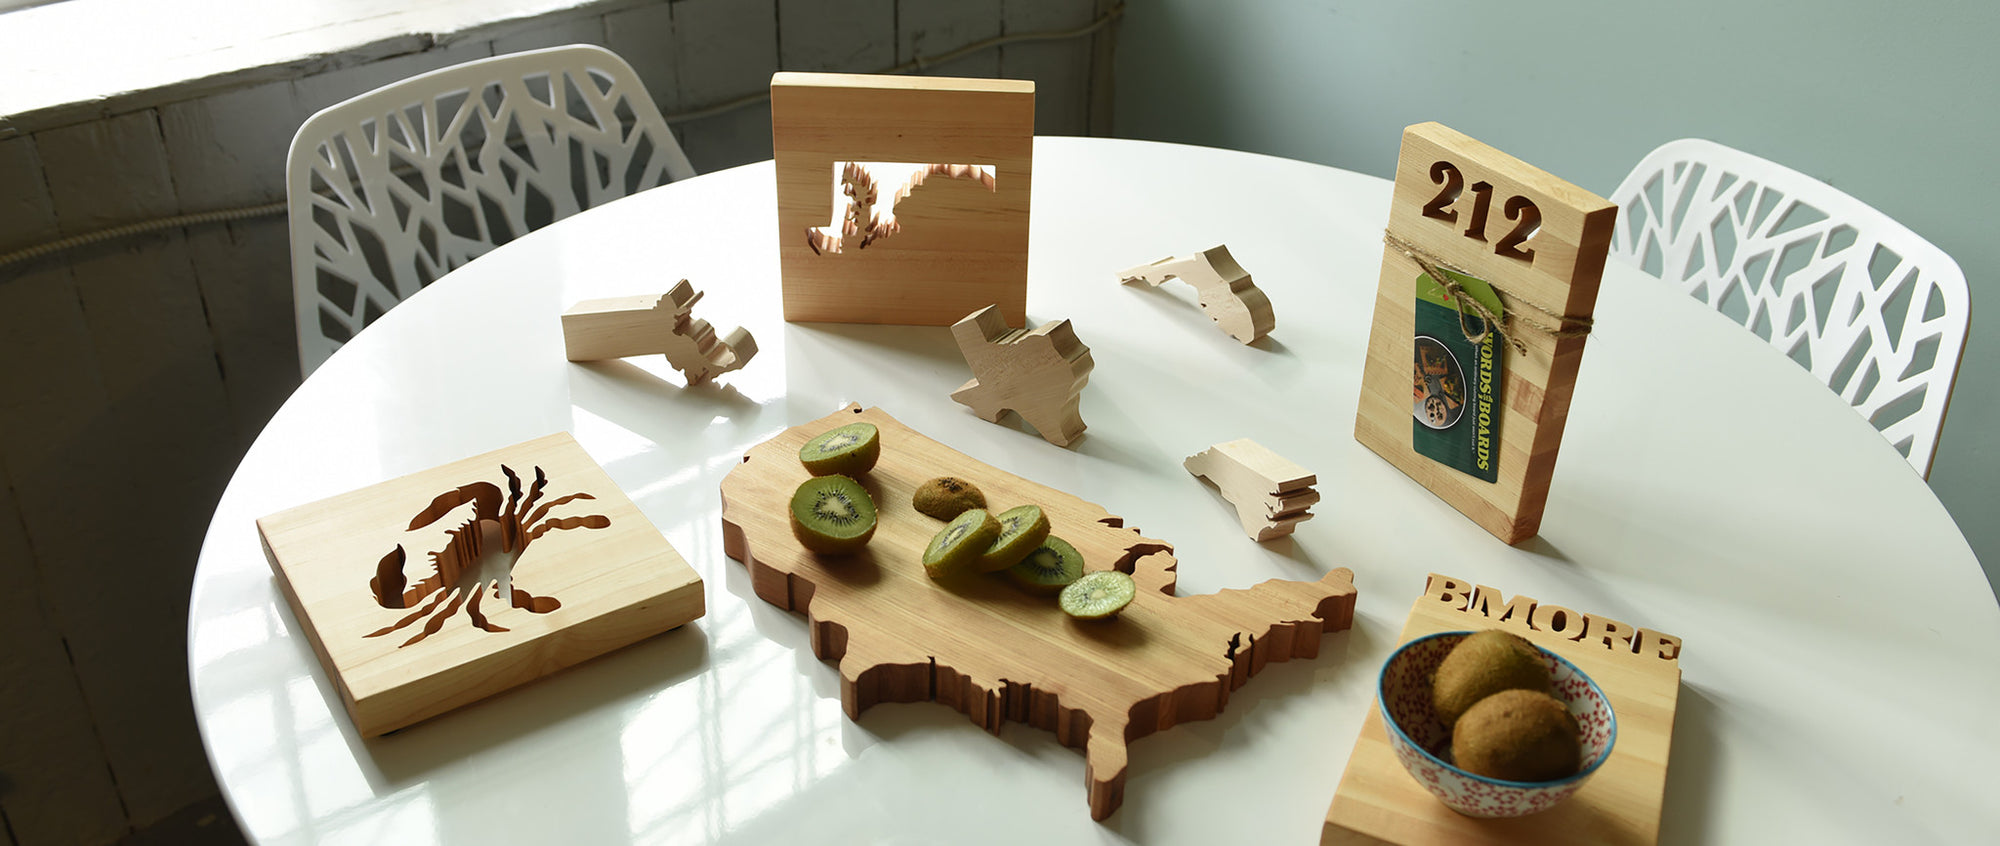 State Pride: Shouting It Loud with Cutting Boards and Kitchen Trivets